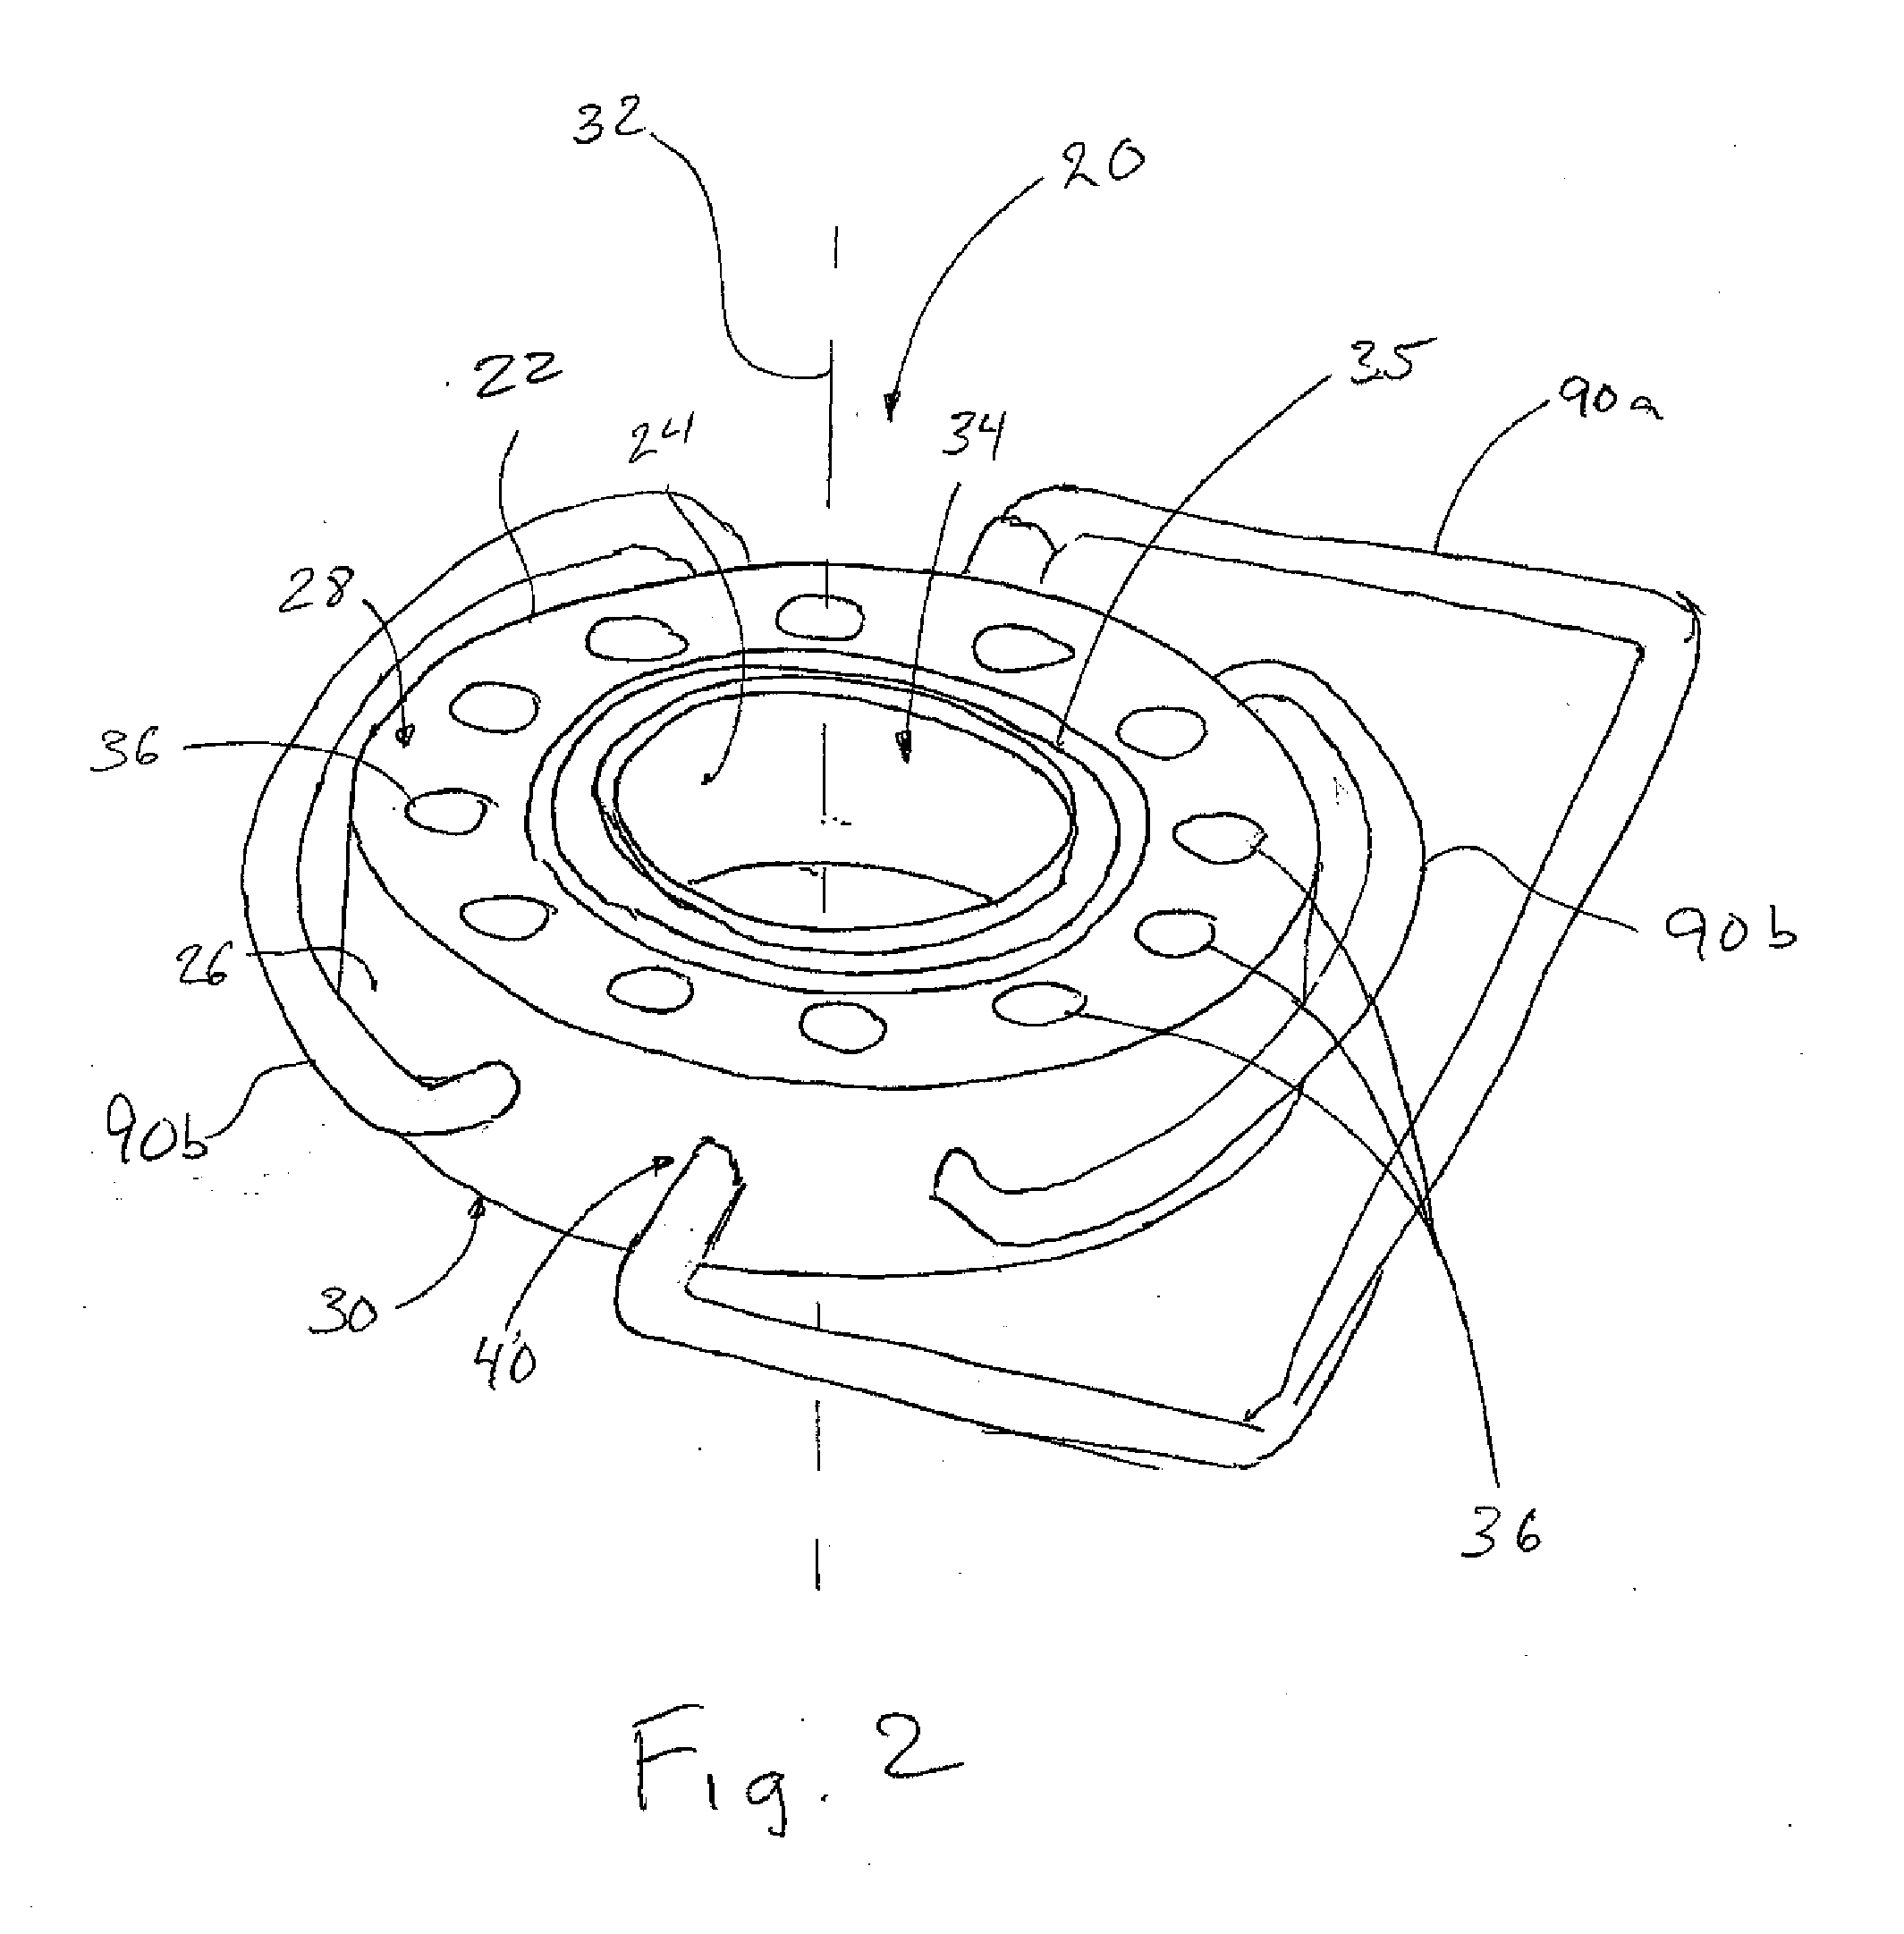 Apparatus and method for sensing a pipe coupler within an oil well structure